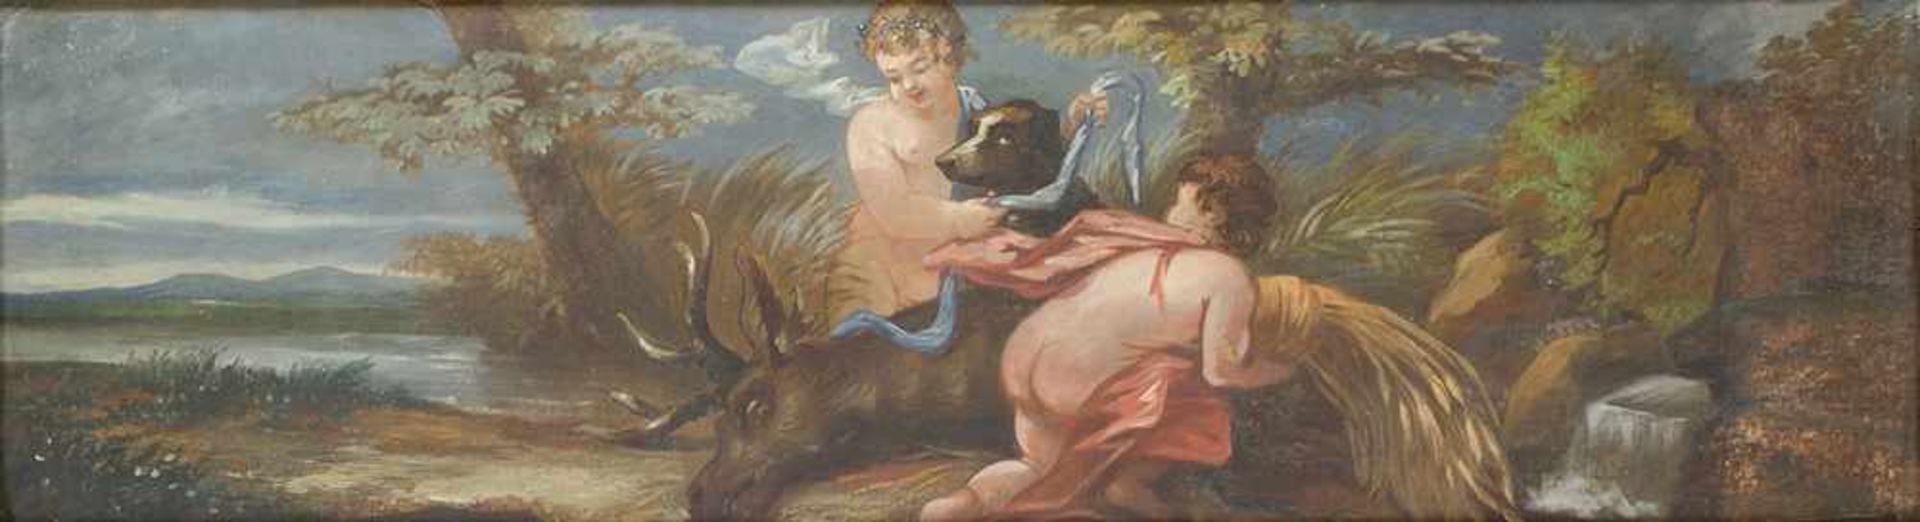 Venetian Artist 18/19th Century, Hunting allegory with two boys, a dog and a stag in landscape, - Bild 2 aus 3